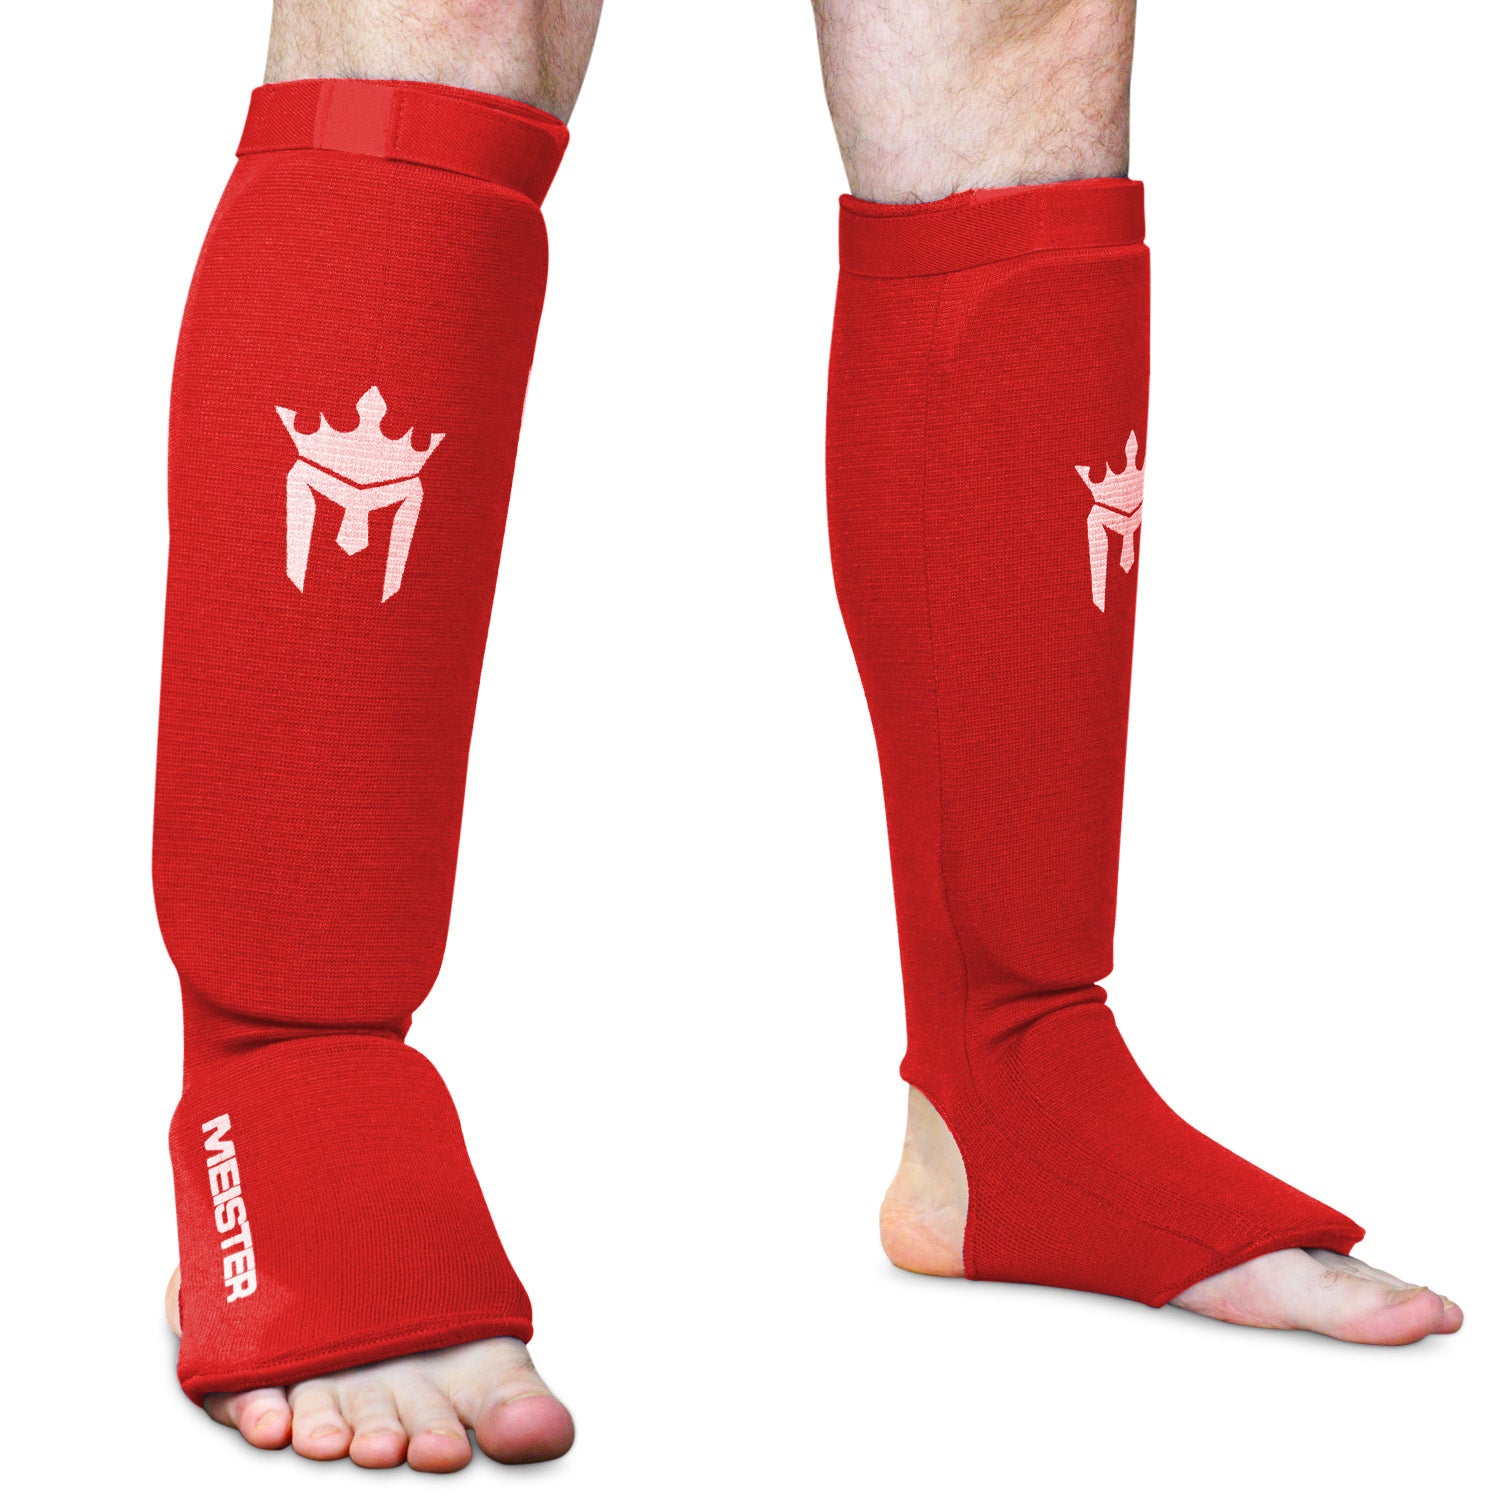 Elastic Cloth Shin & Instep Padded Guards (Pair) - Red